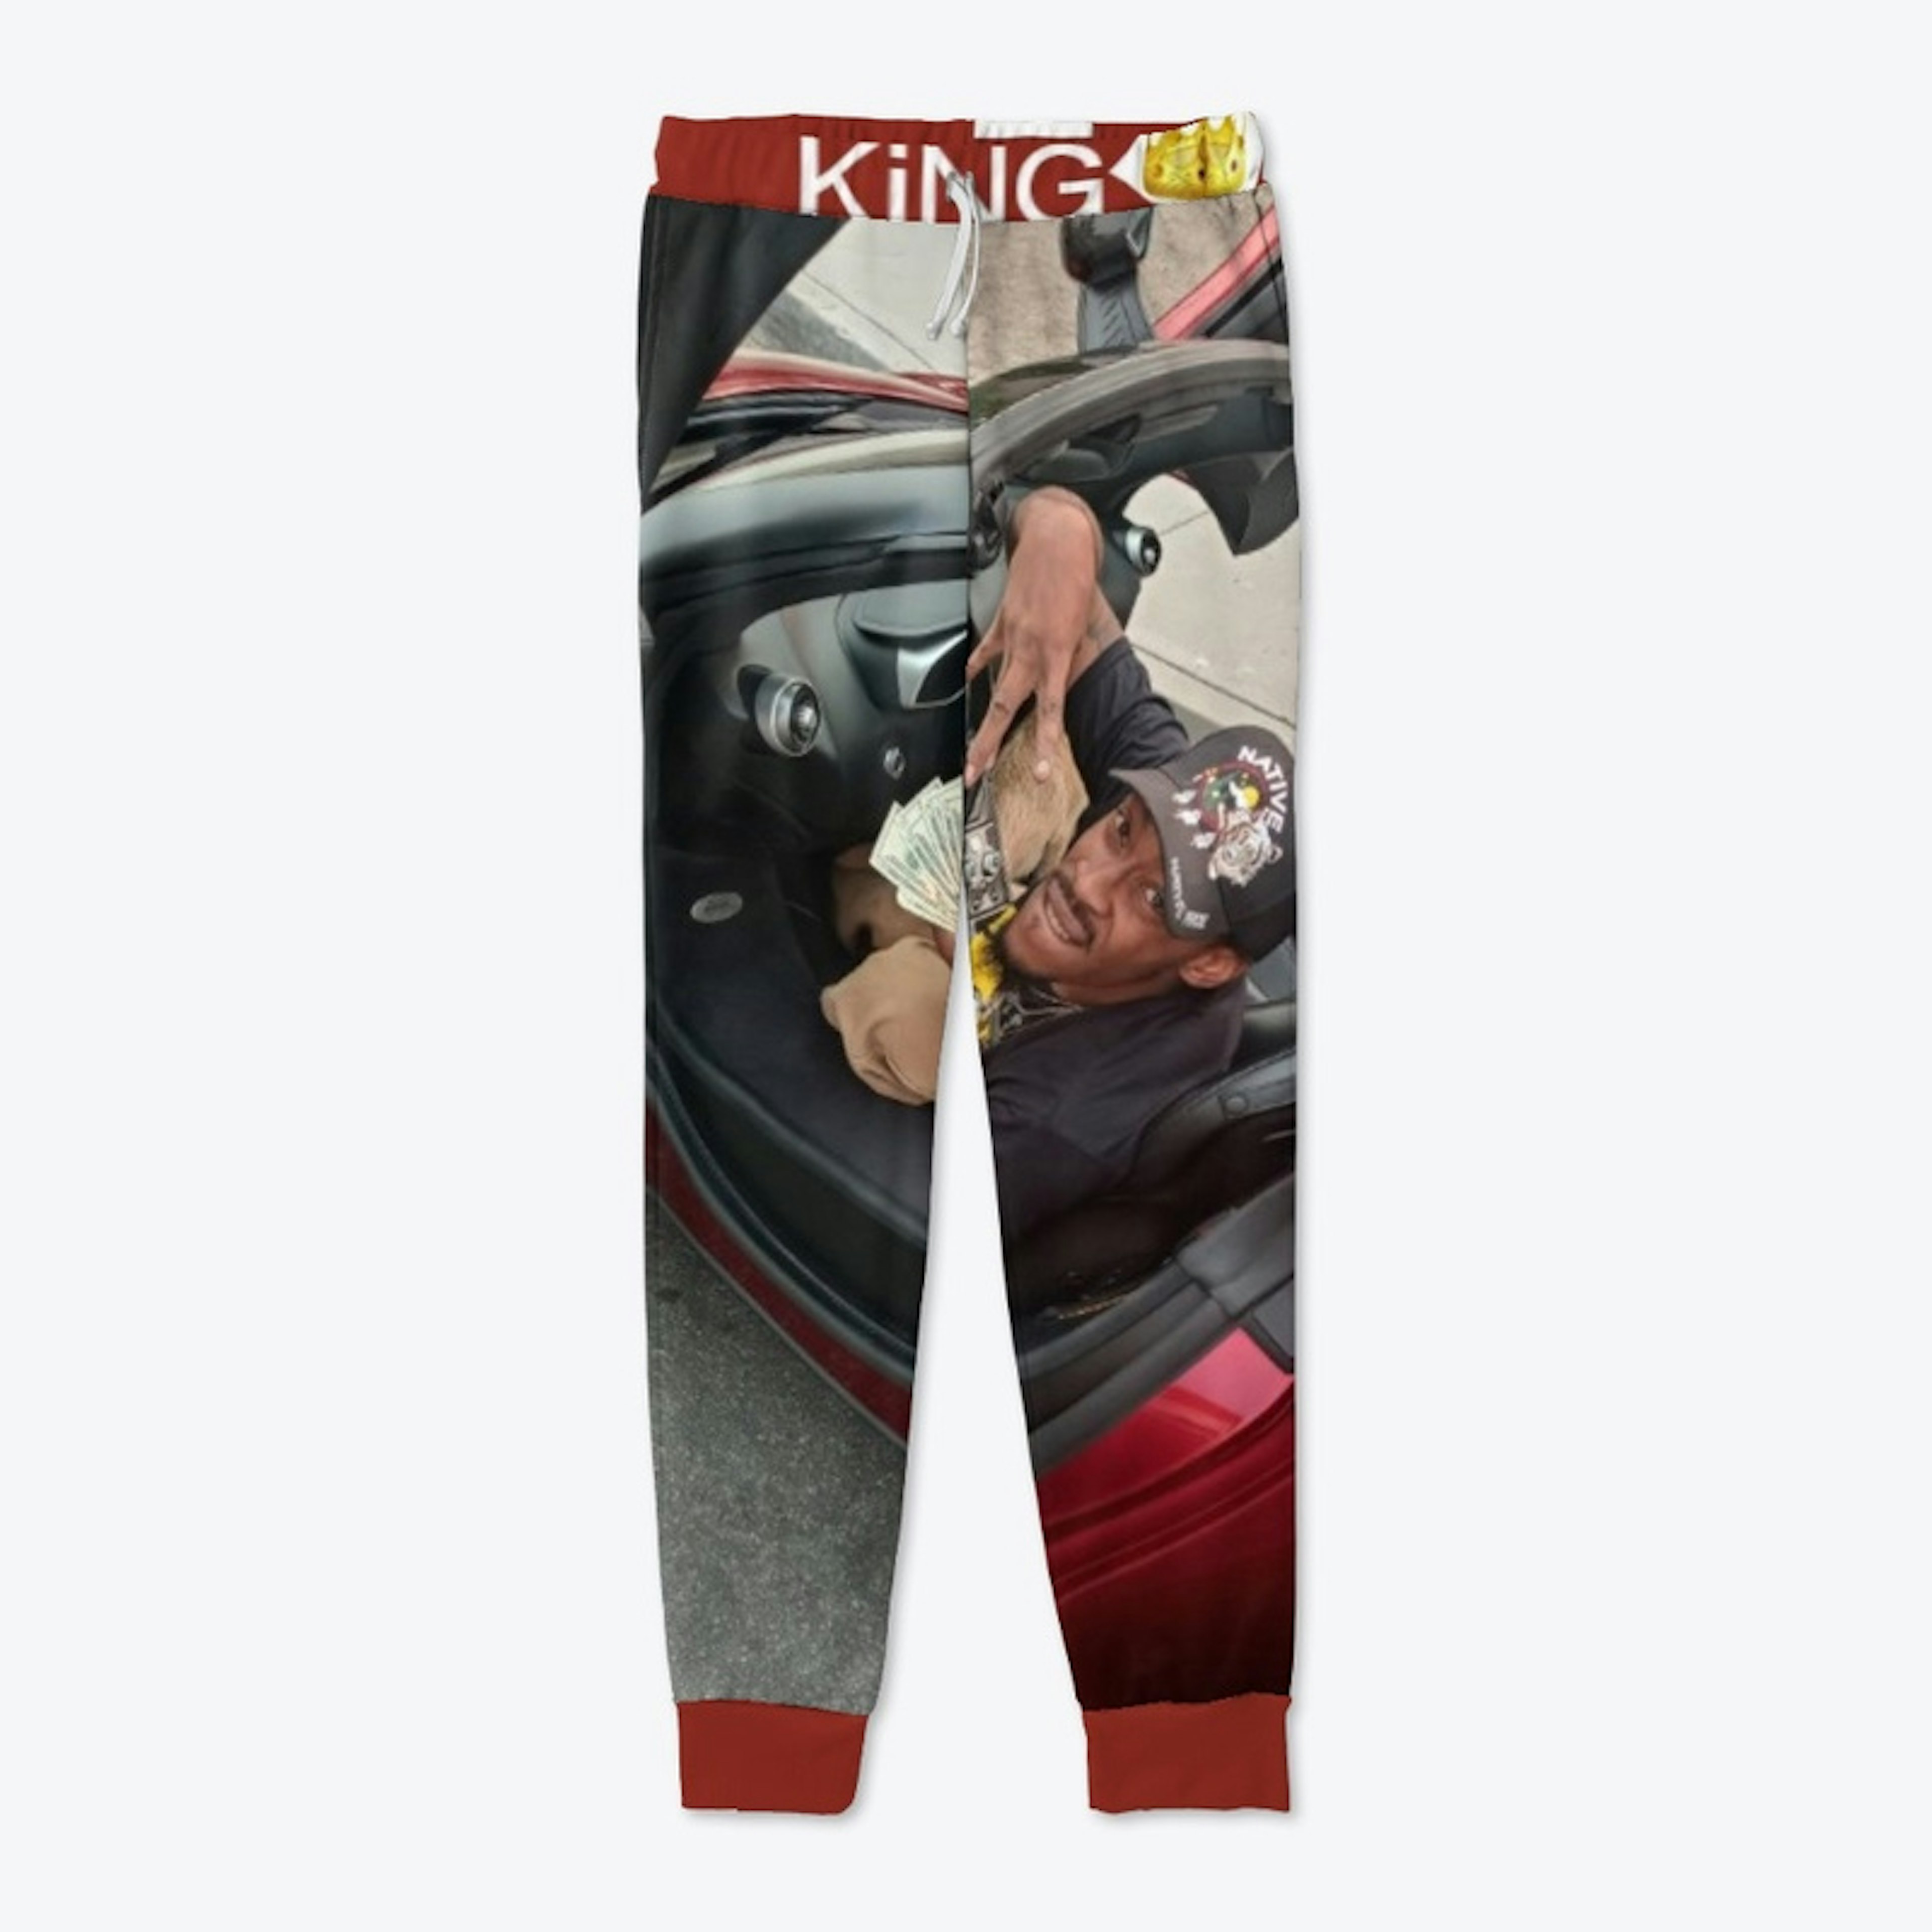 KiNG Clothes